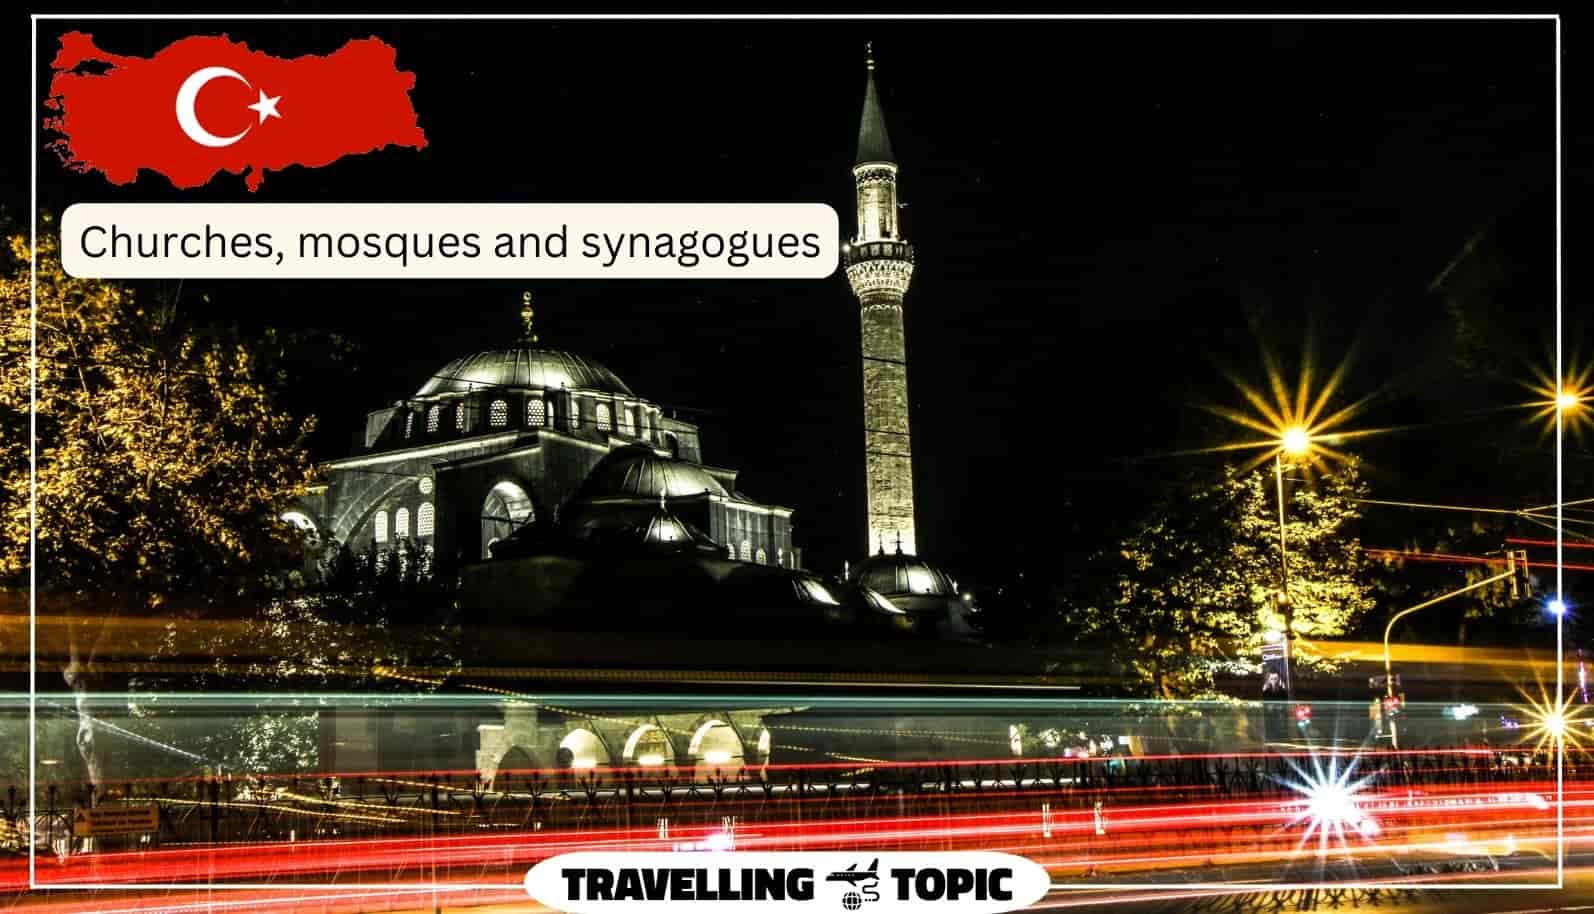 Churches, mosques and synagogues